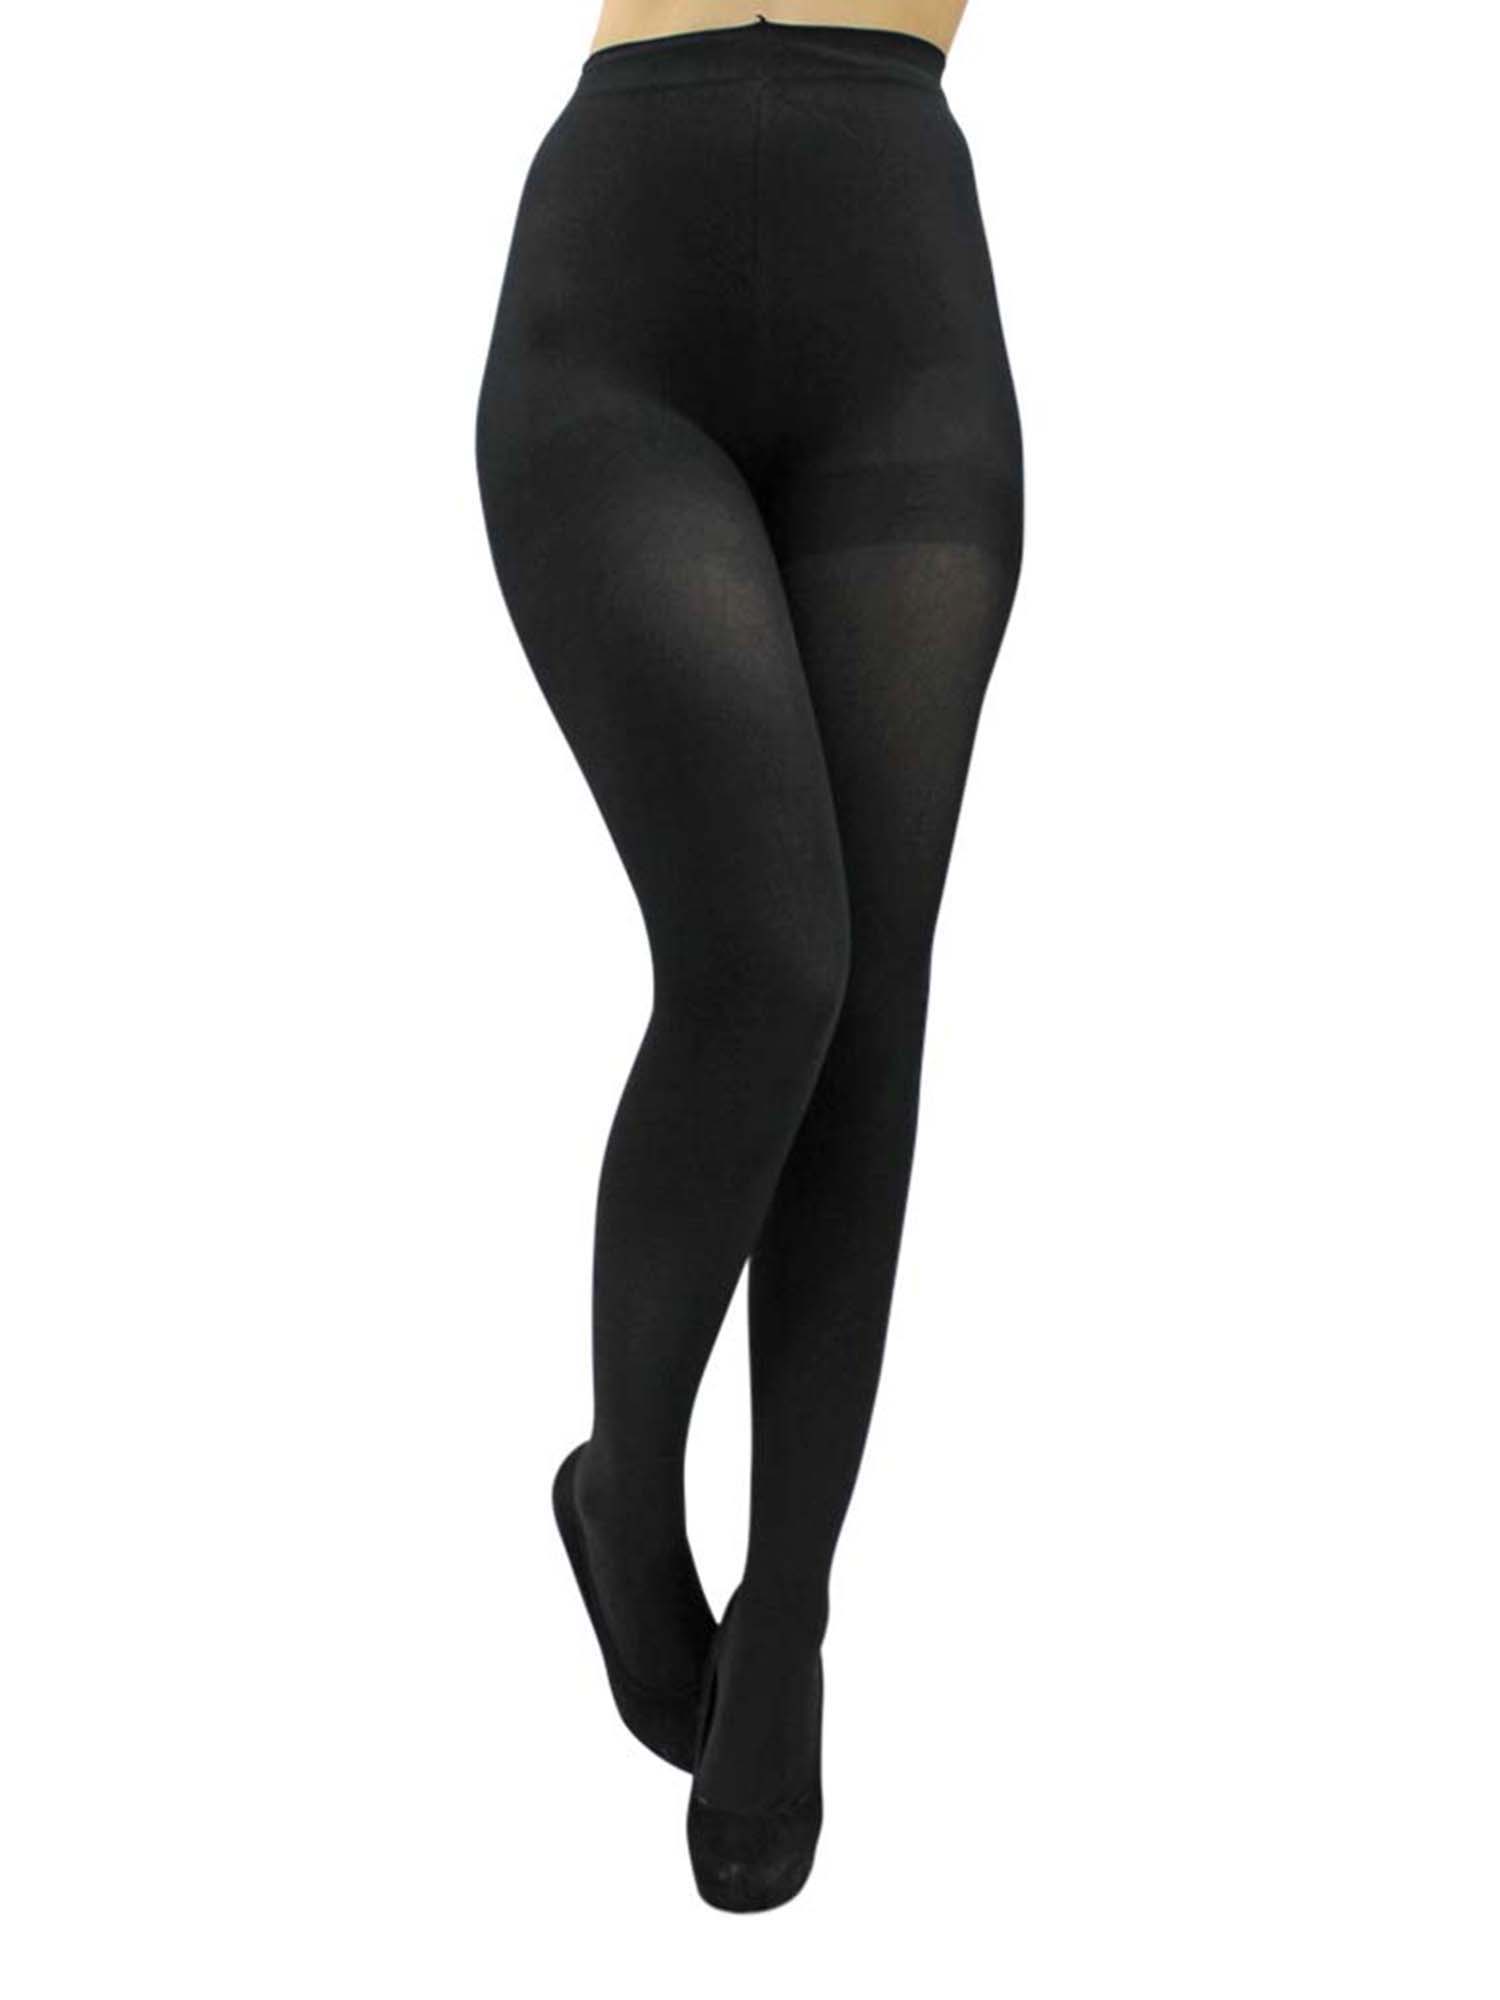 Opaque Black Stretchy Pantyhose Tights - image 1 of 3